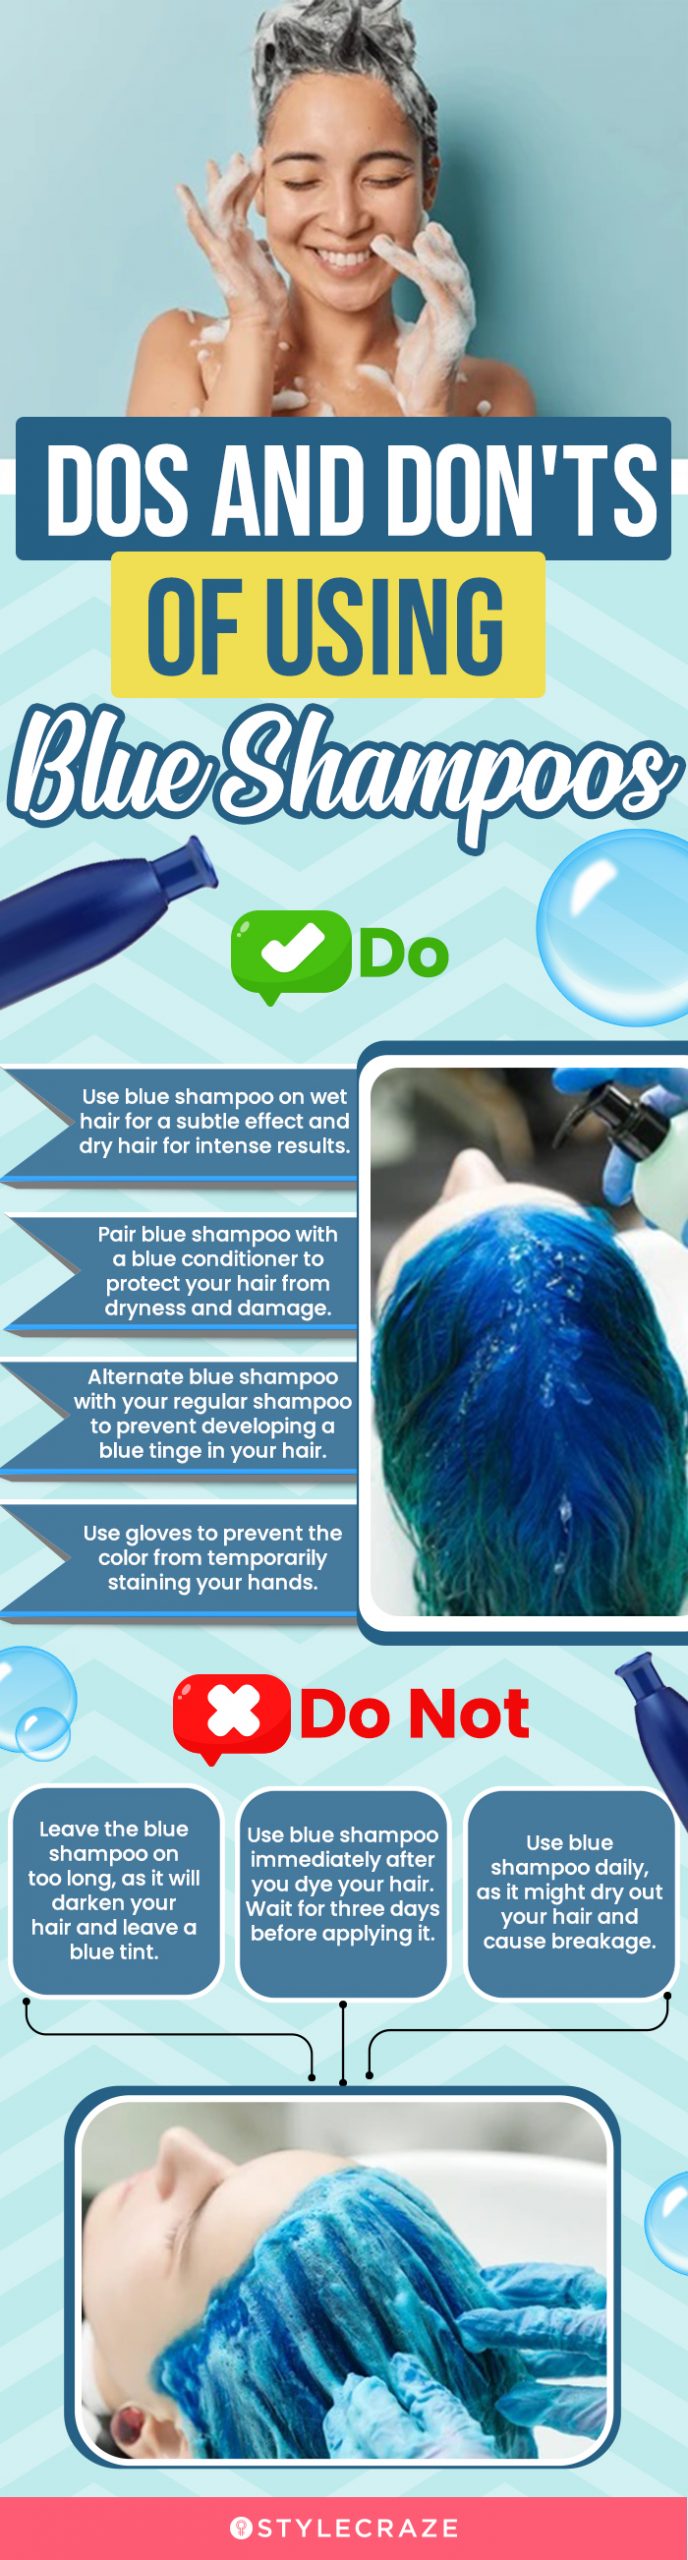 Dos And Don'ts Of Using Blue Shampoos (infographic)